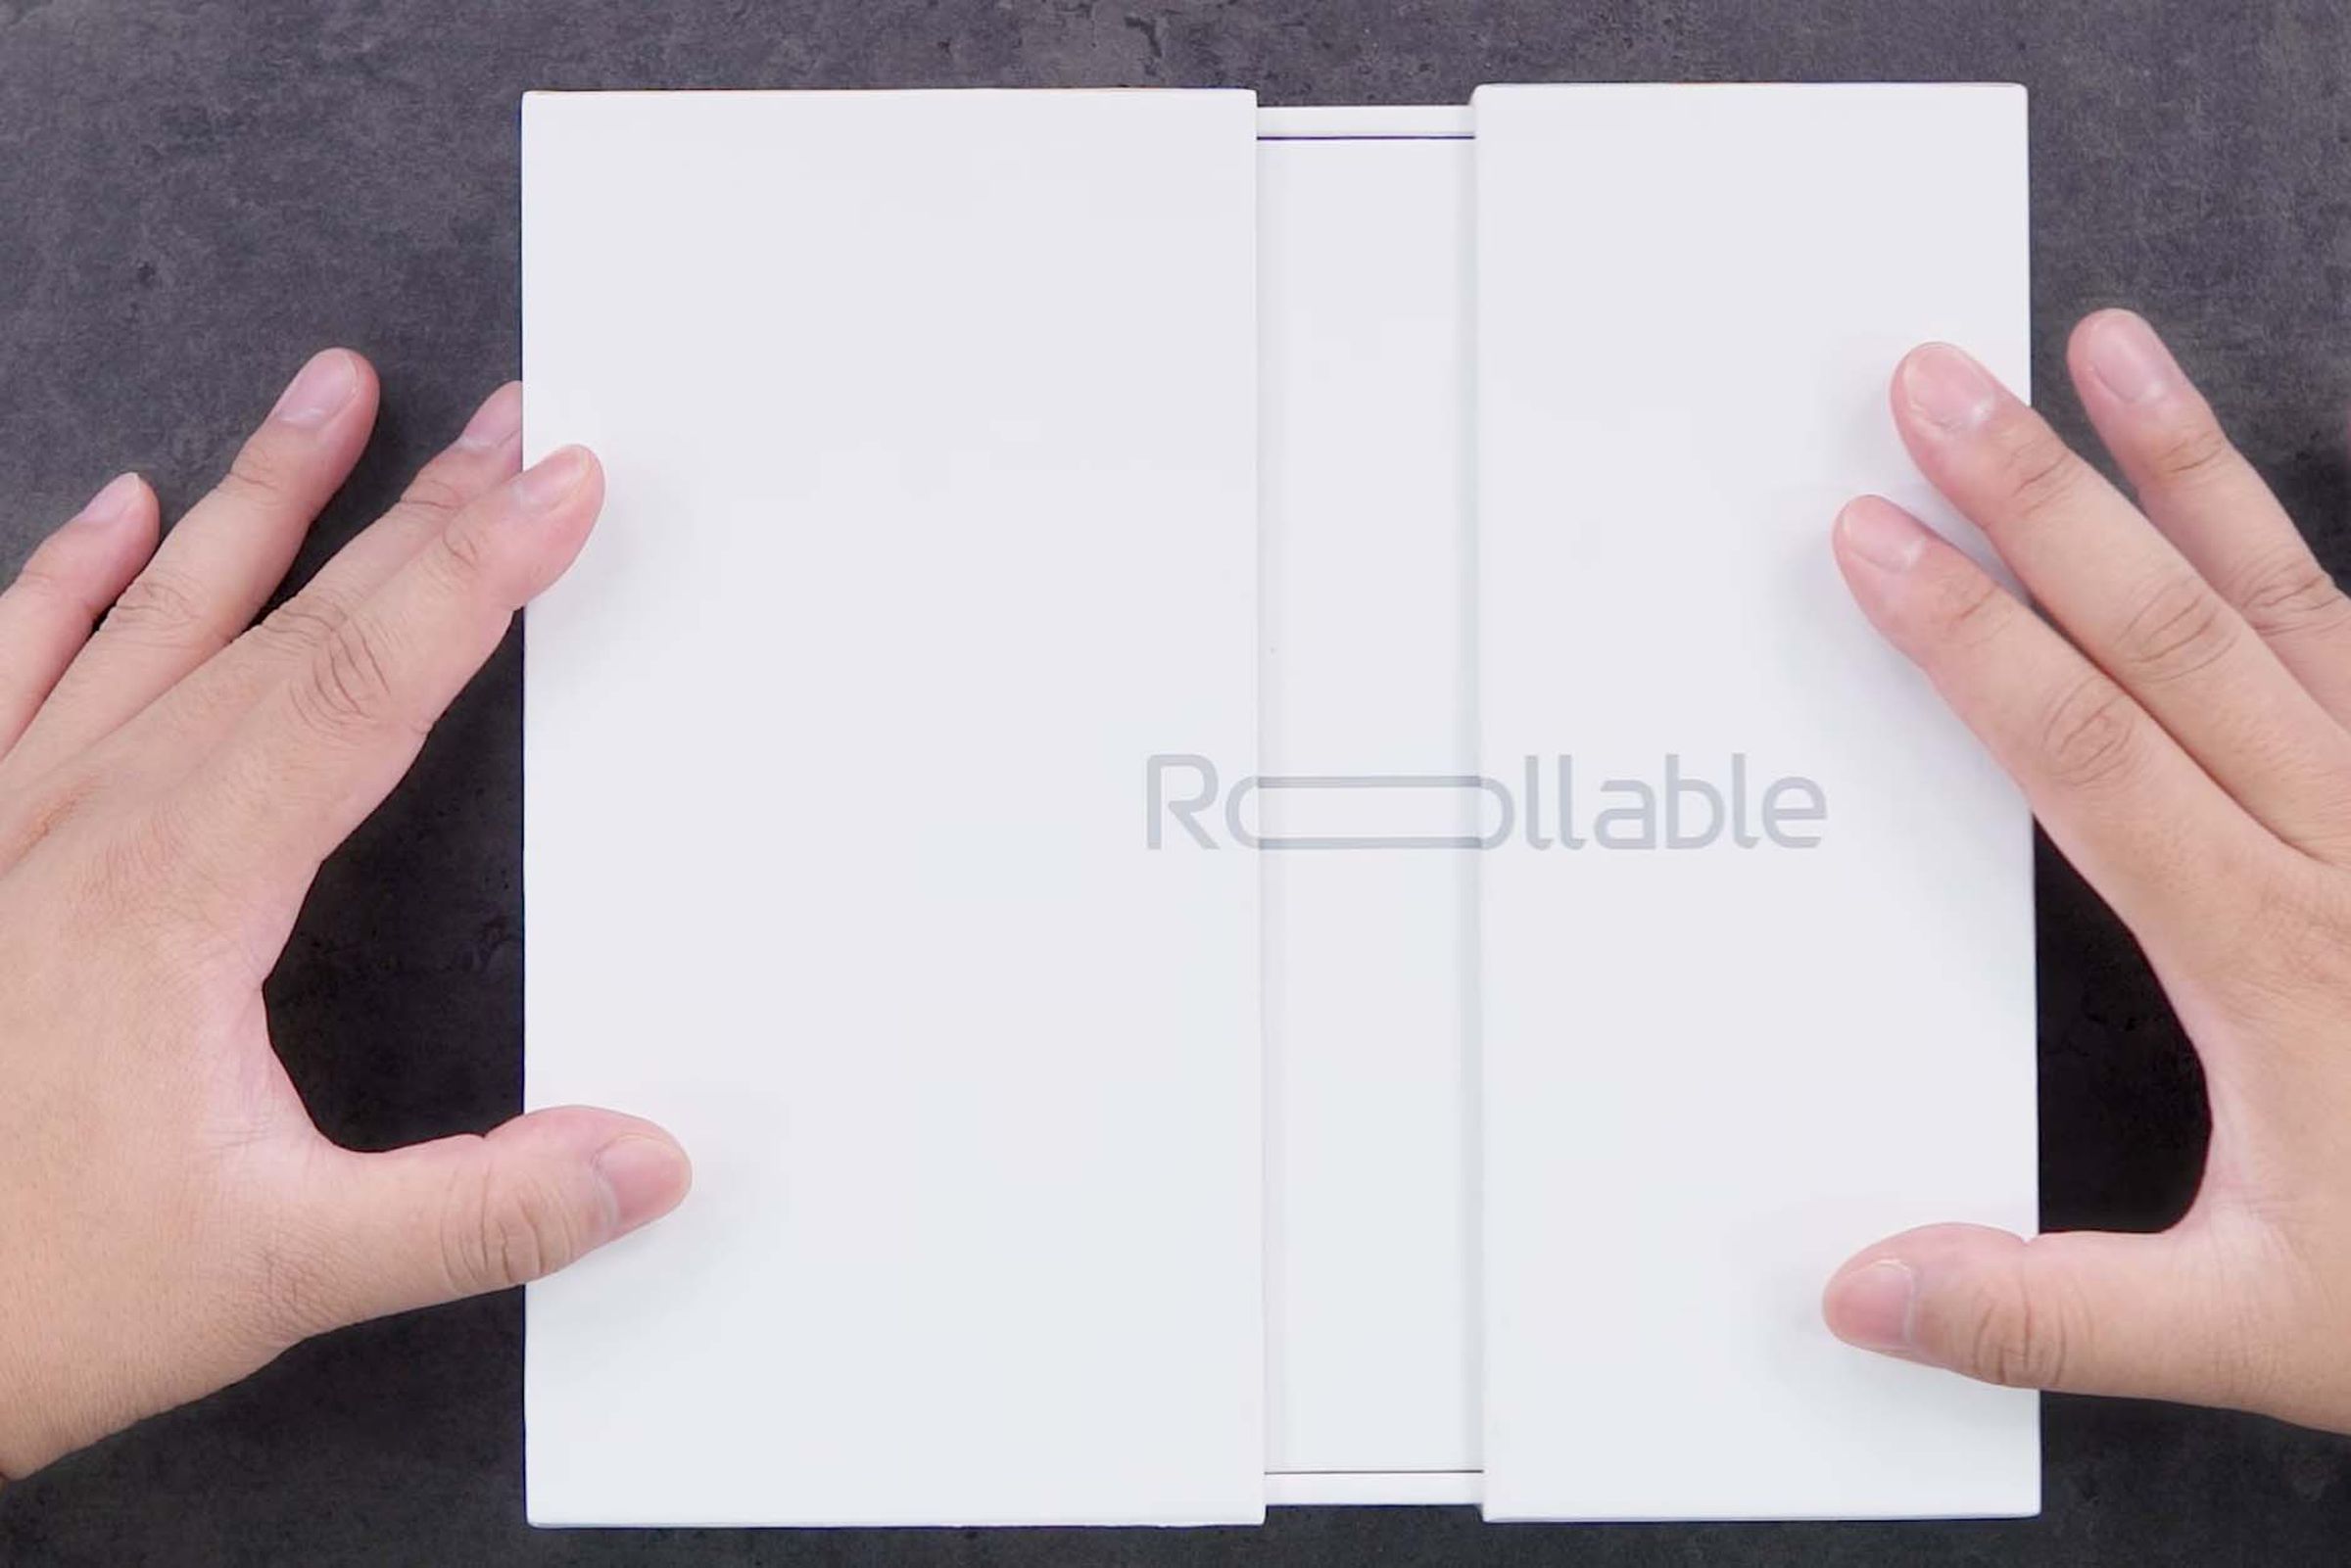 LG Rollable’s box.